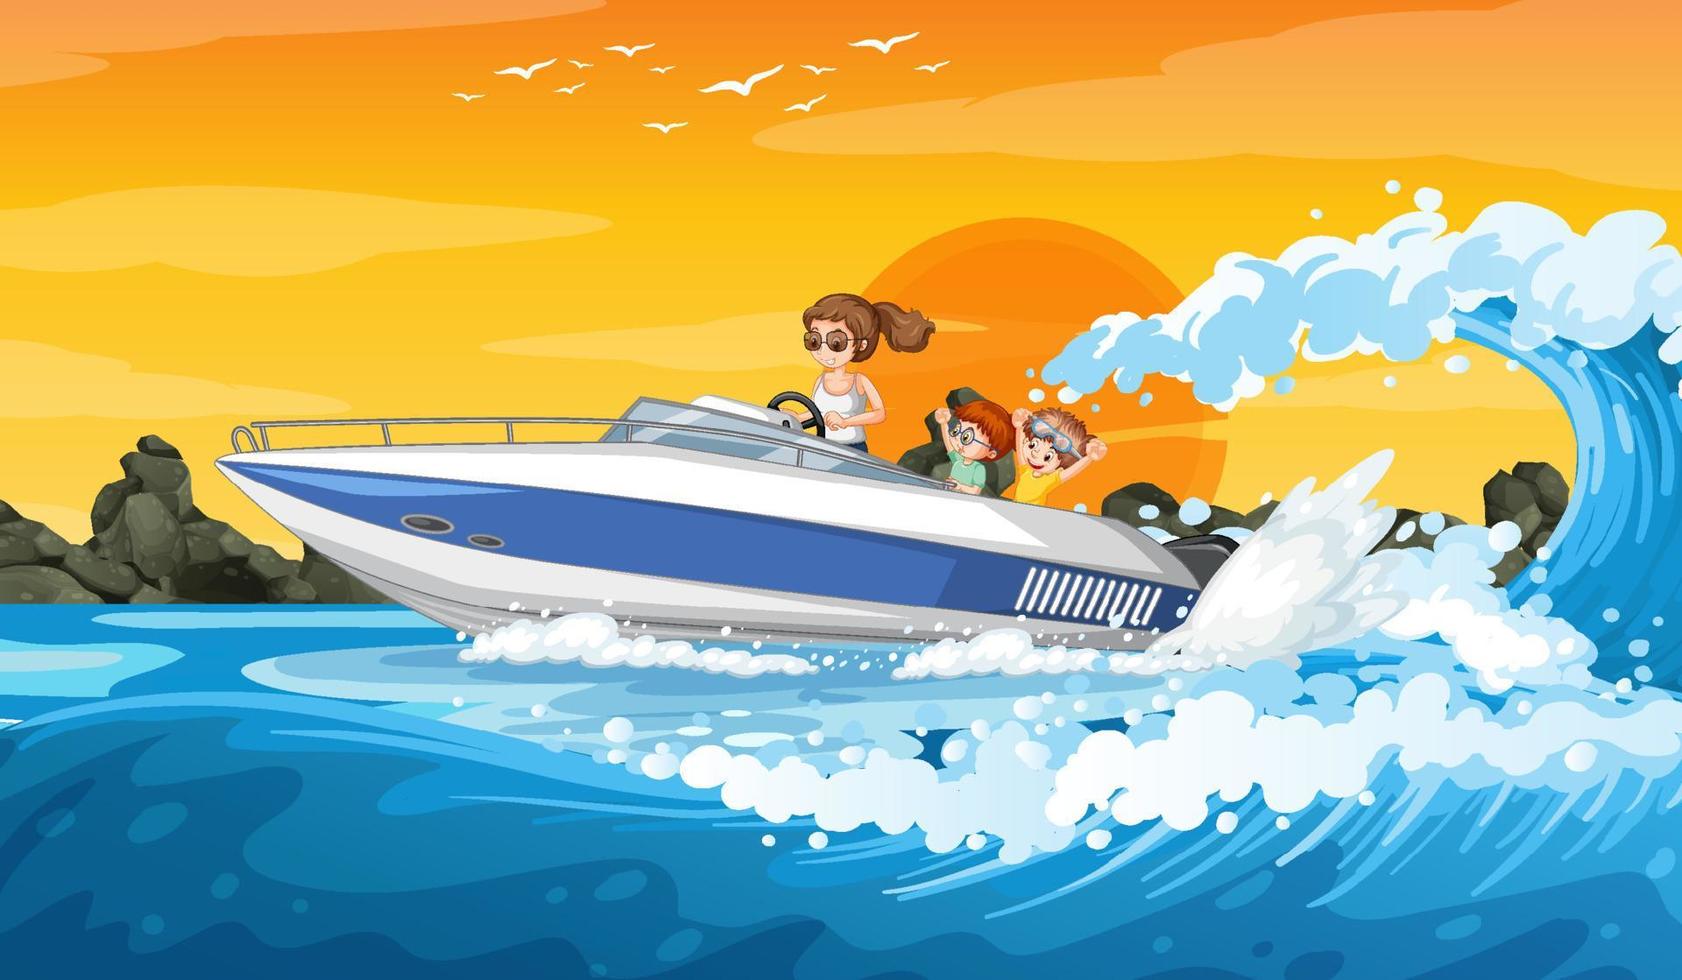 Ocean wave scenery with a woman driving a boat with children vector